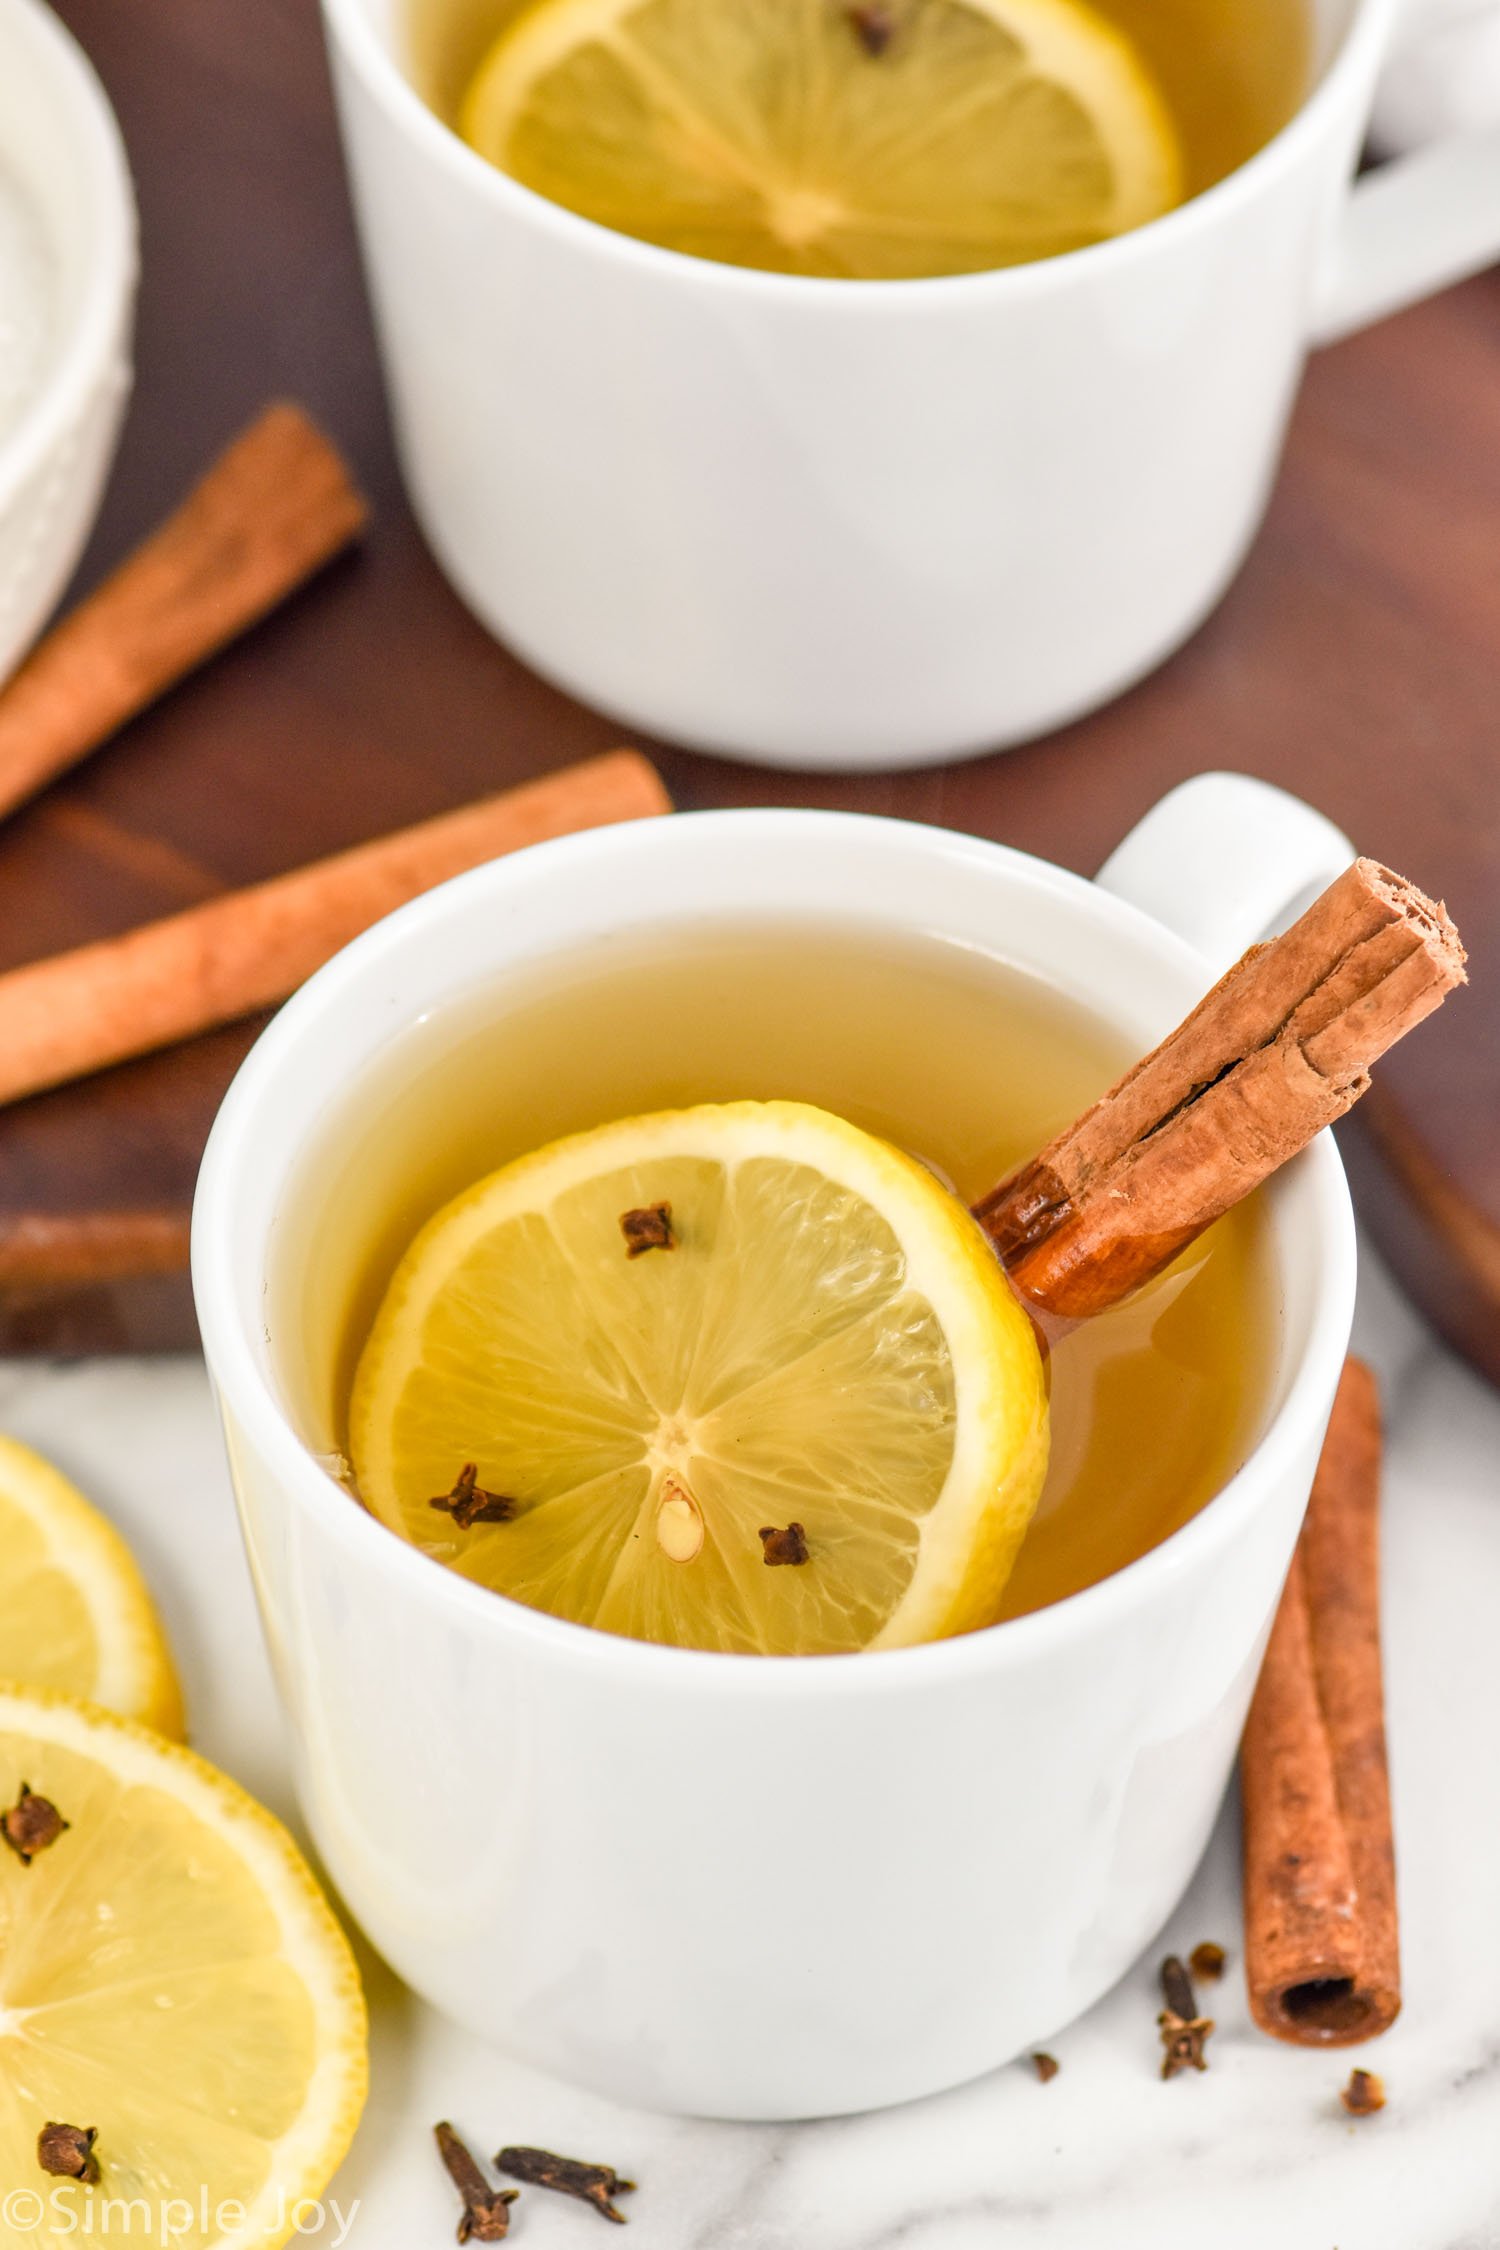 Overhead photo of a Hot Toddy in a white mug with a cinnamon stick and lemon slice in the mug and around the mug